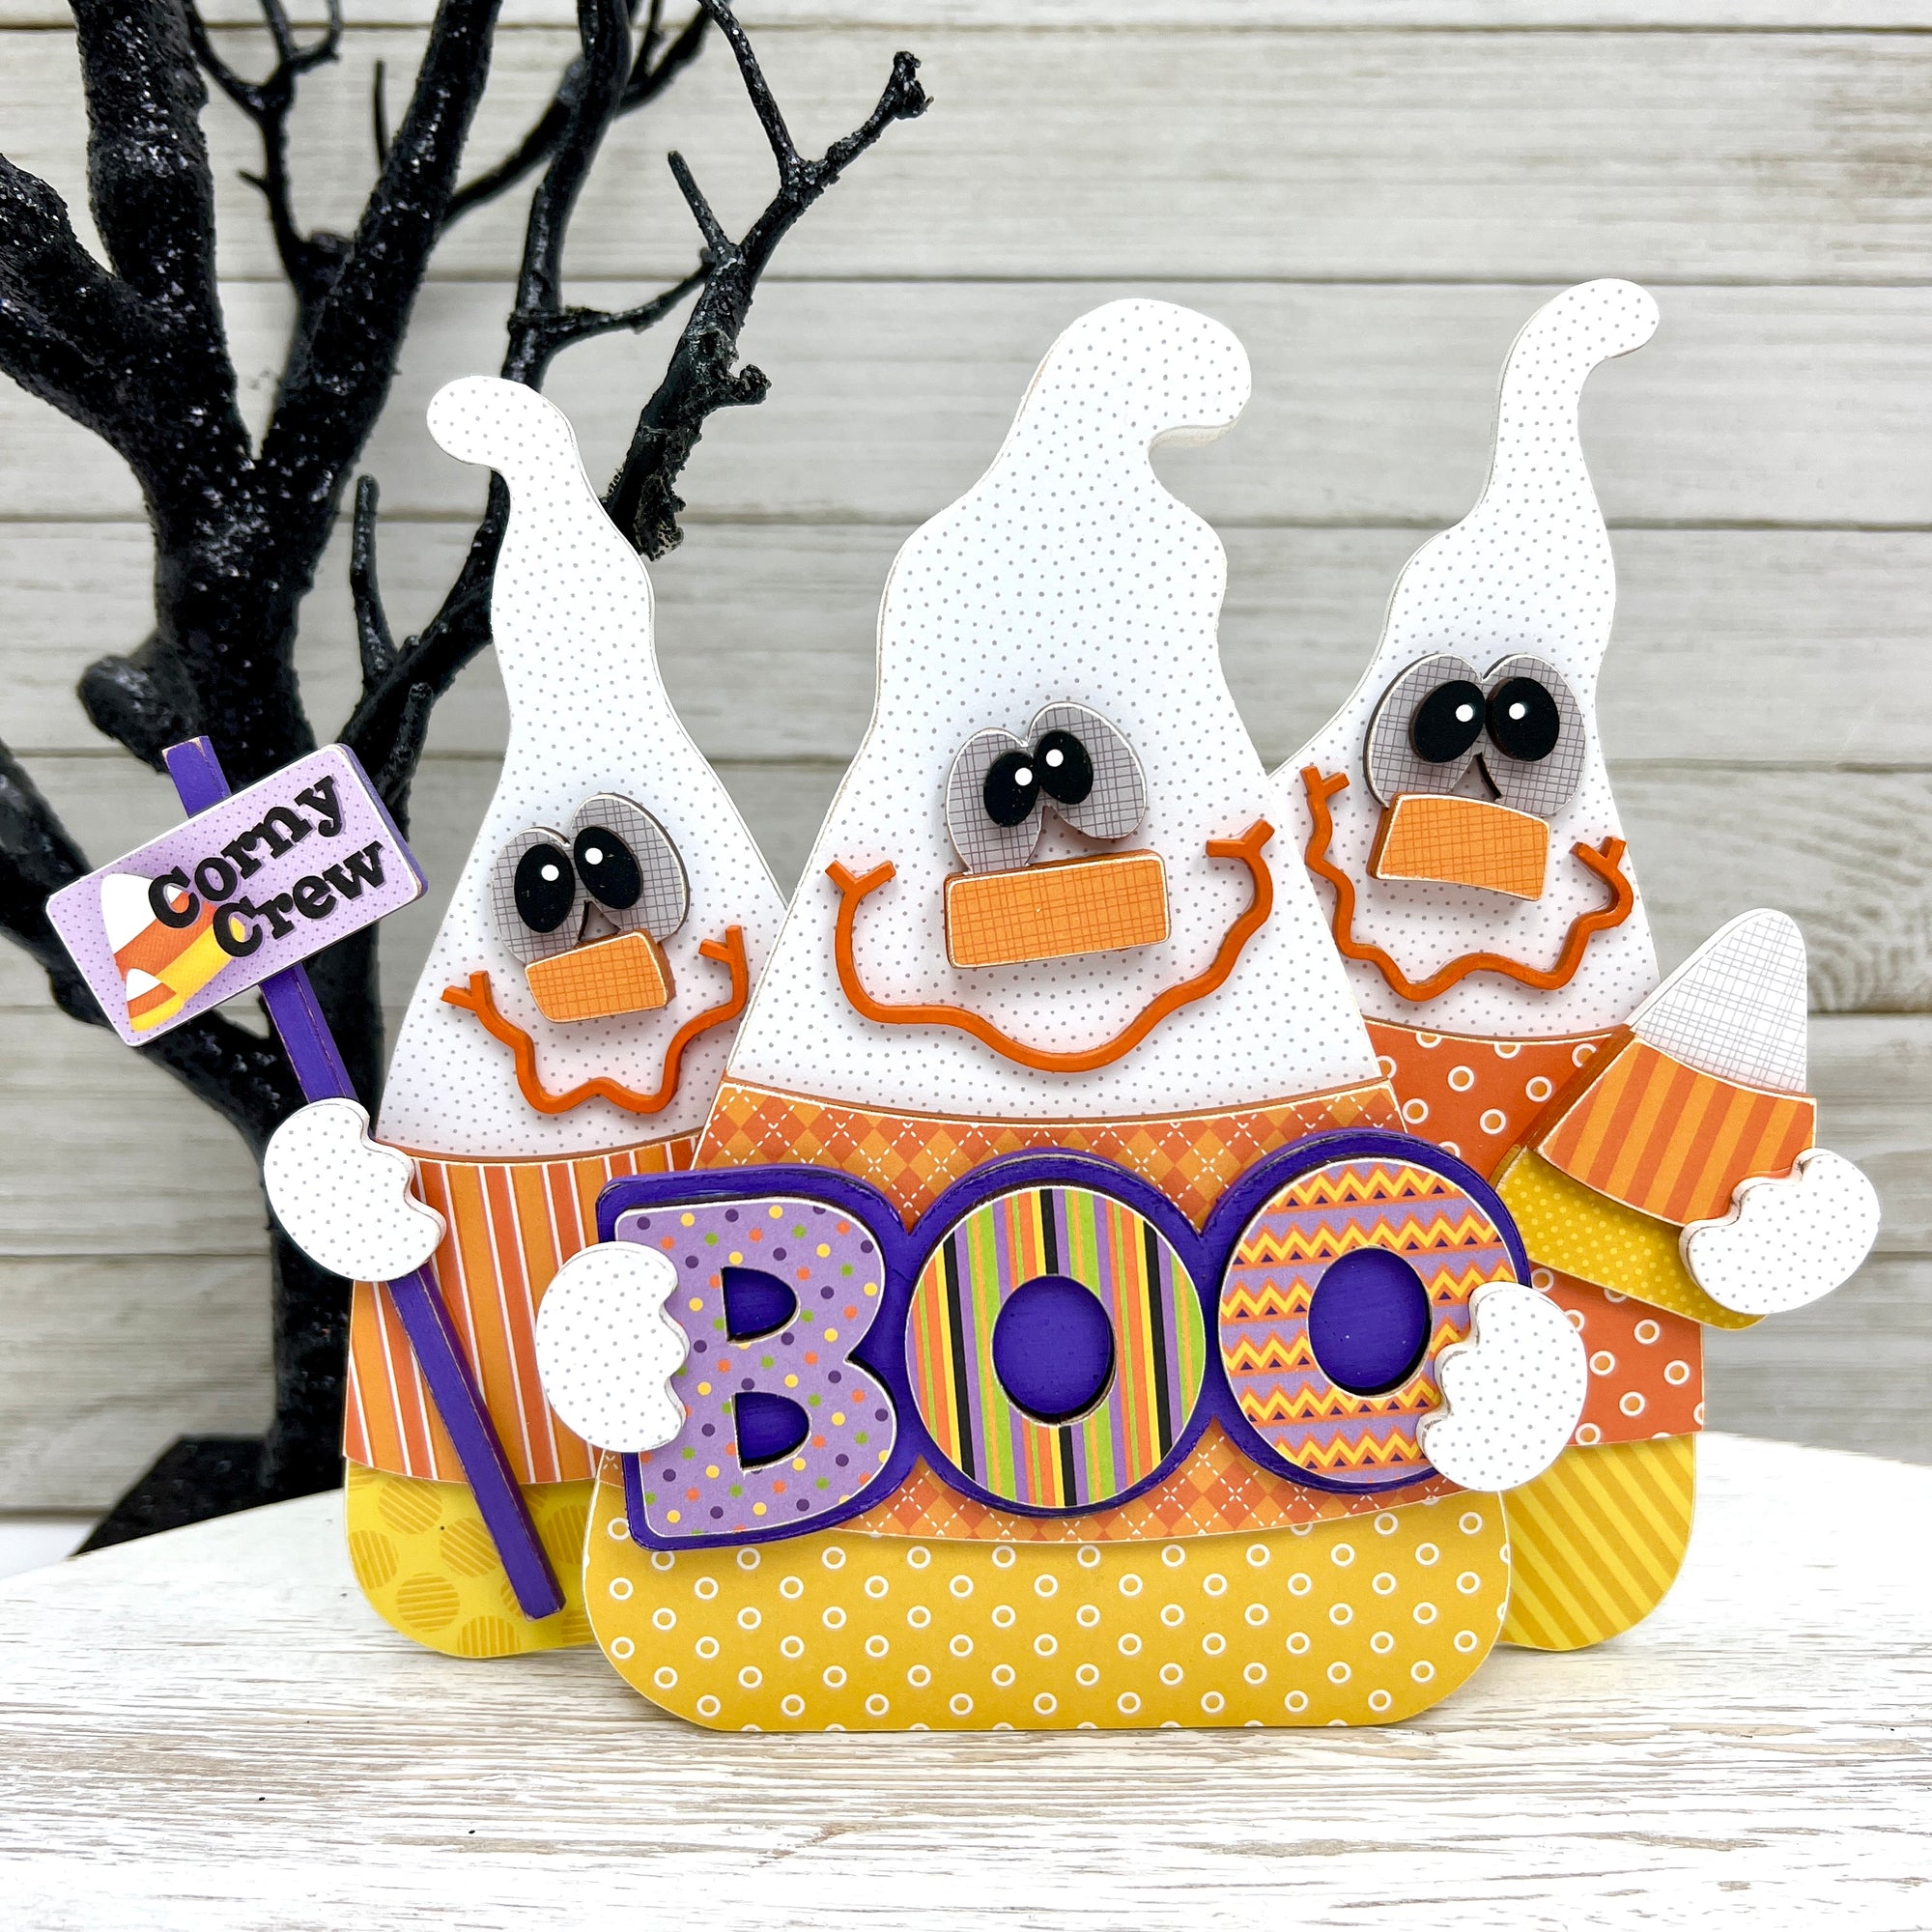 Boo crew set of 3 wood ghosts that look like candy corn.  Halloween wood decoration craft kit.